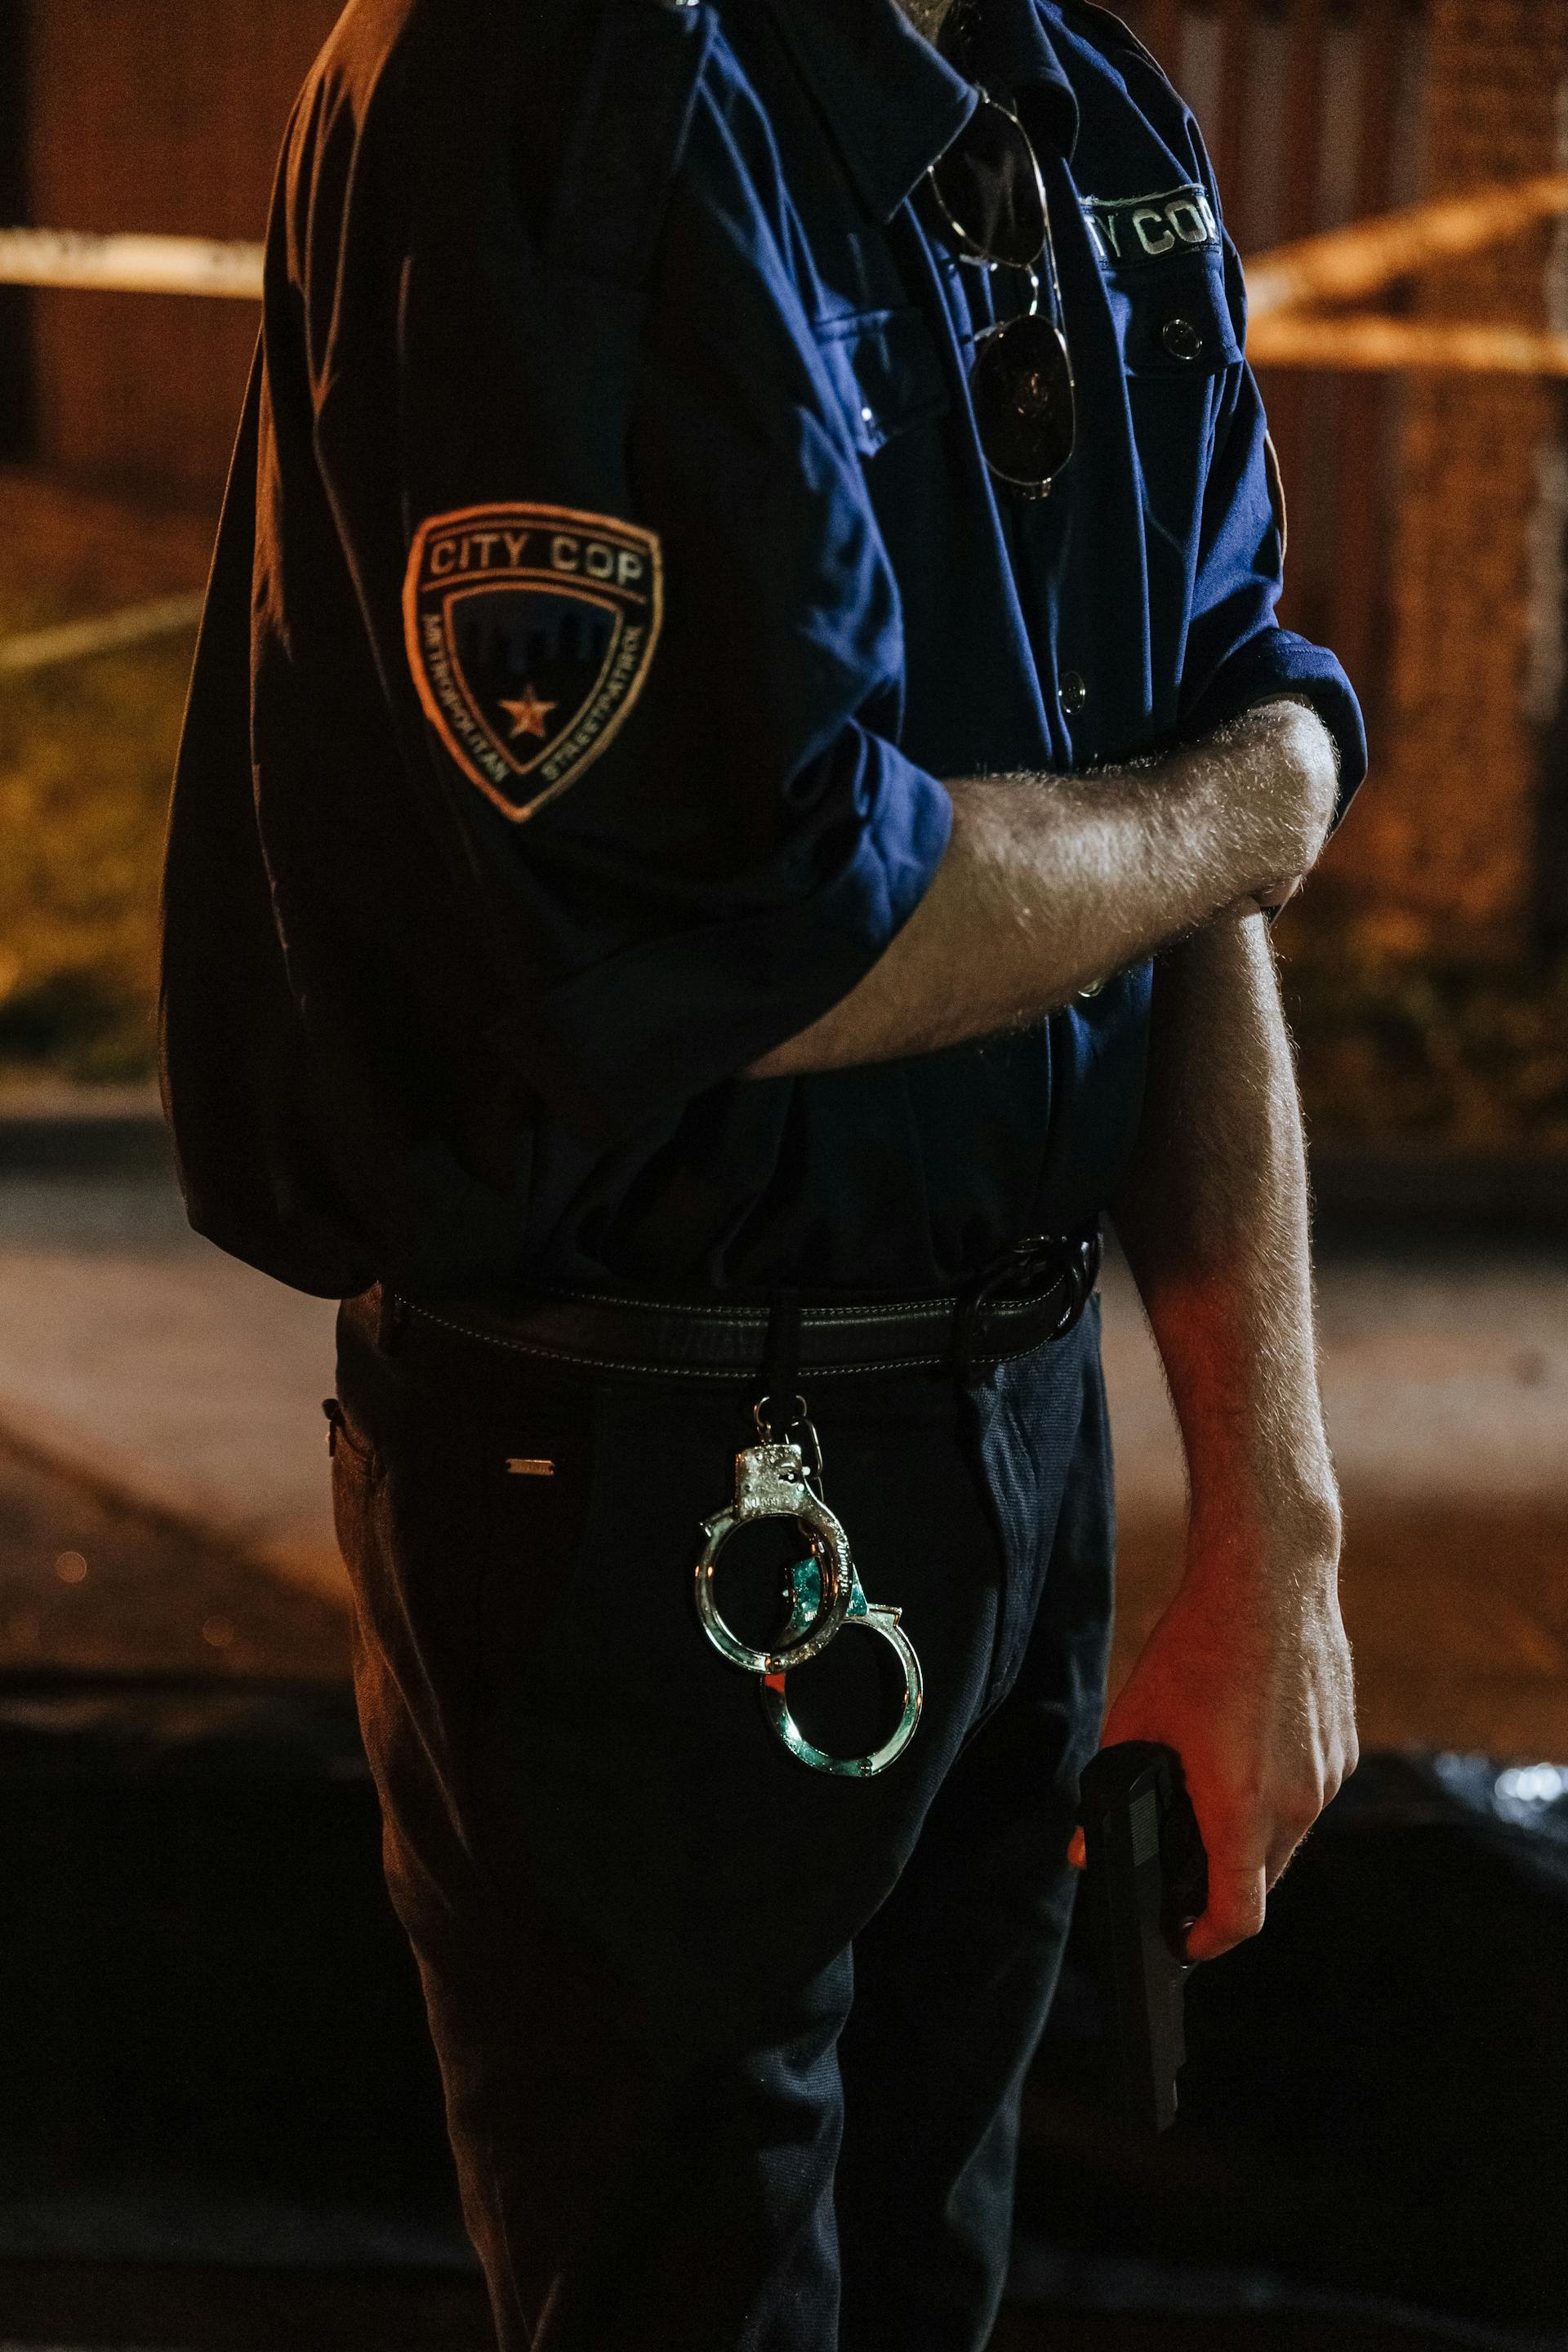 Handcuffs hanging from a police officer's pants | Source: Midjourney